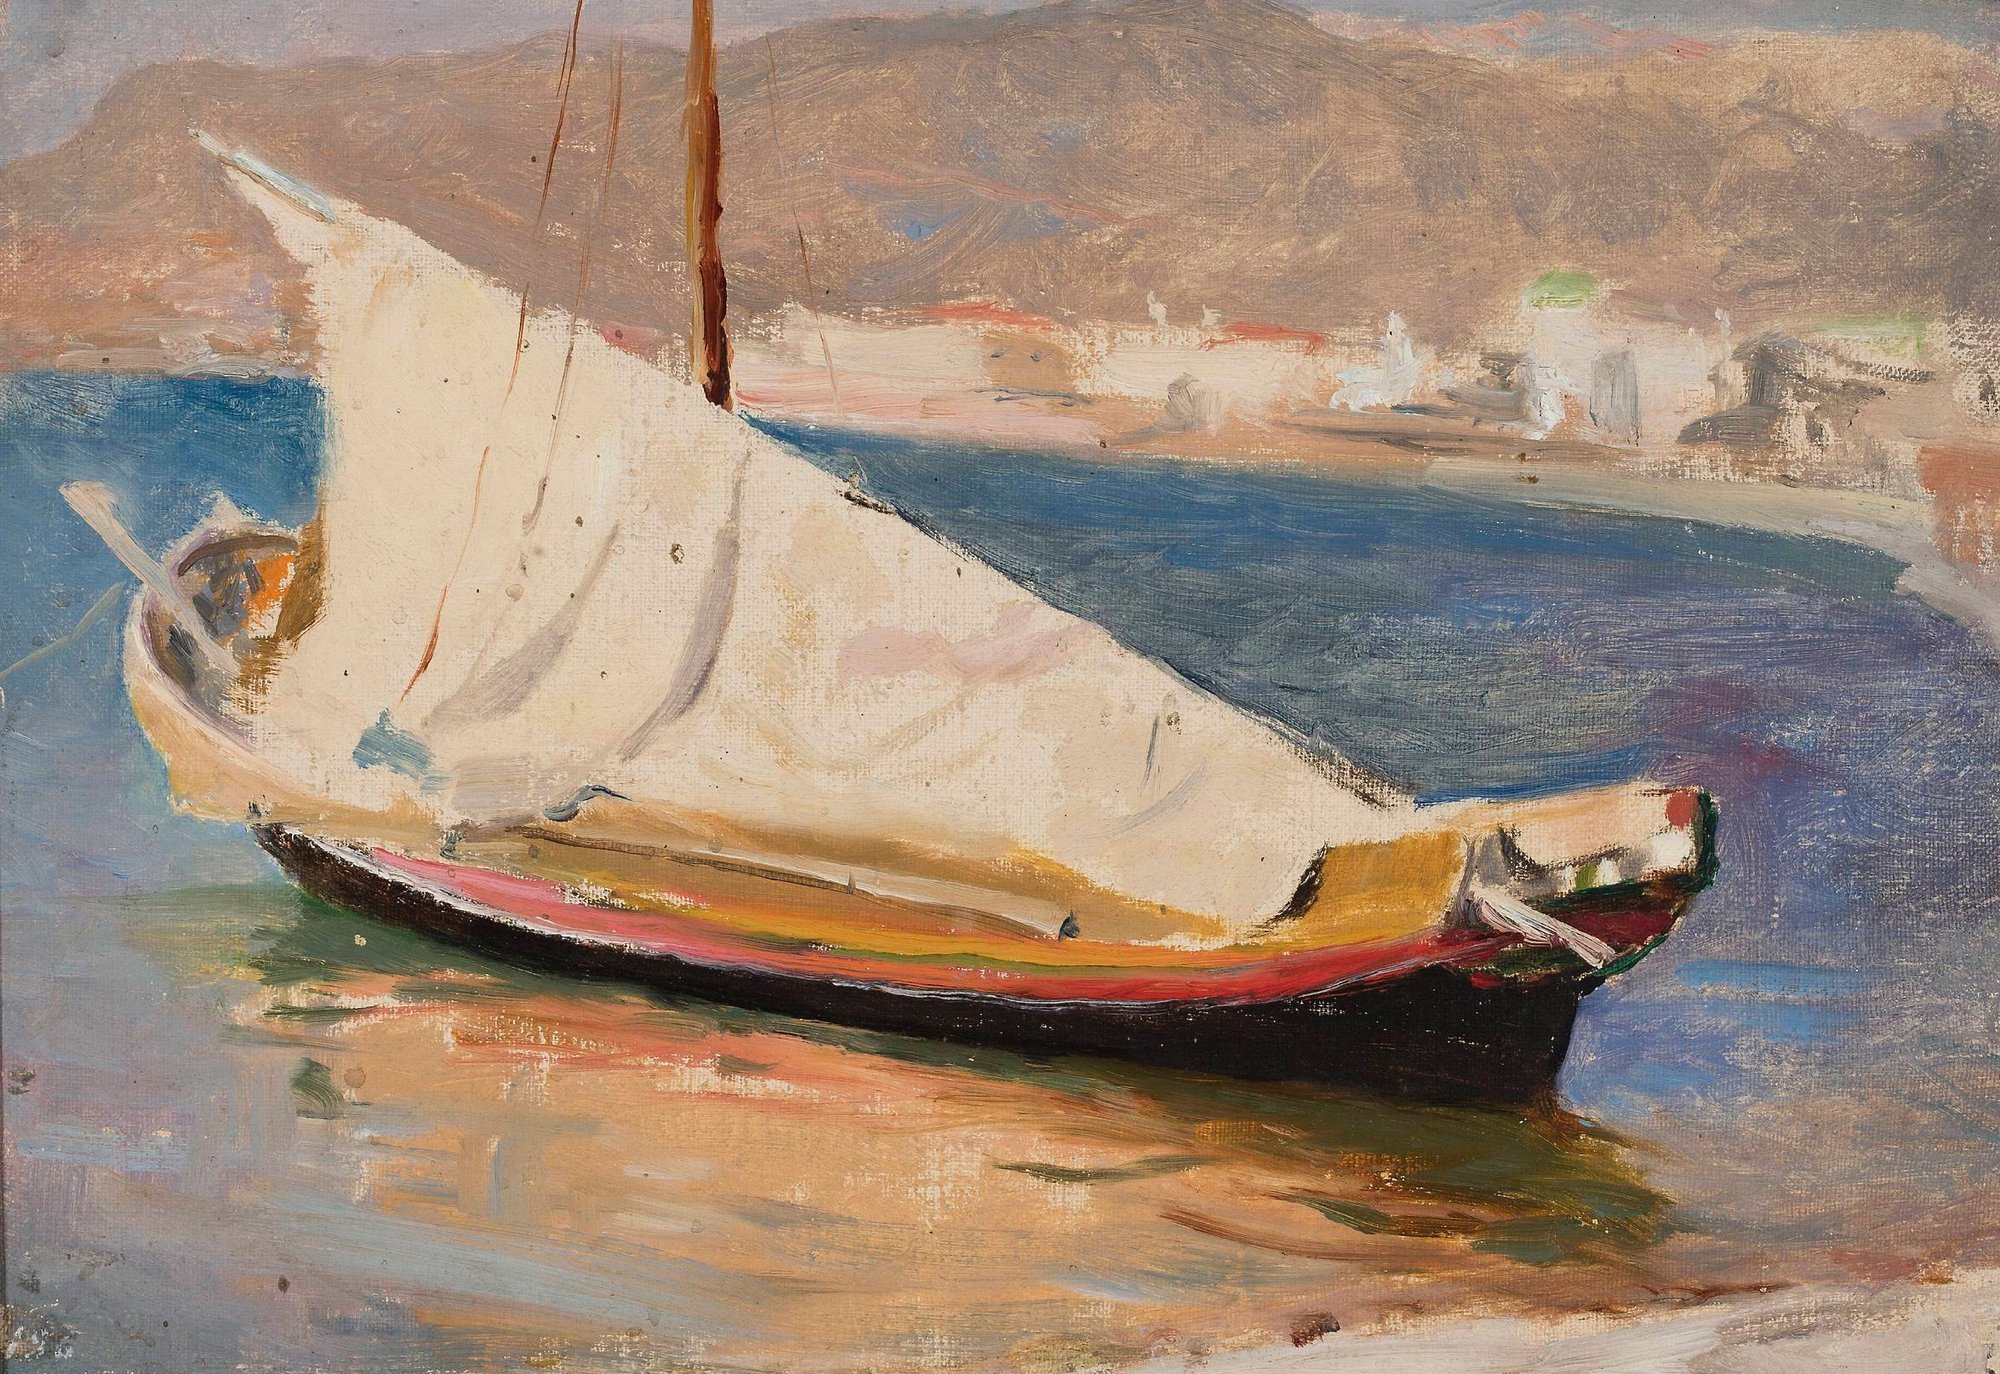 Sail boat – Yalta. From the journey to Crimea (between 1887 and 1899)